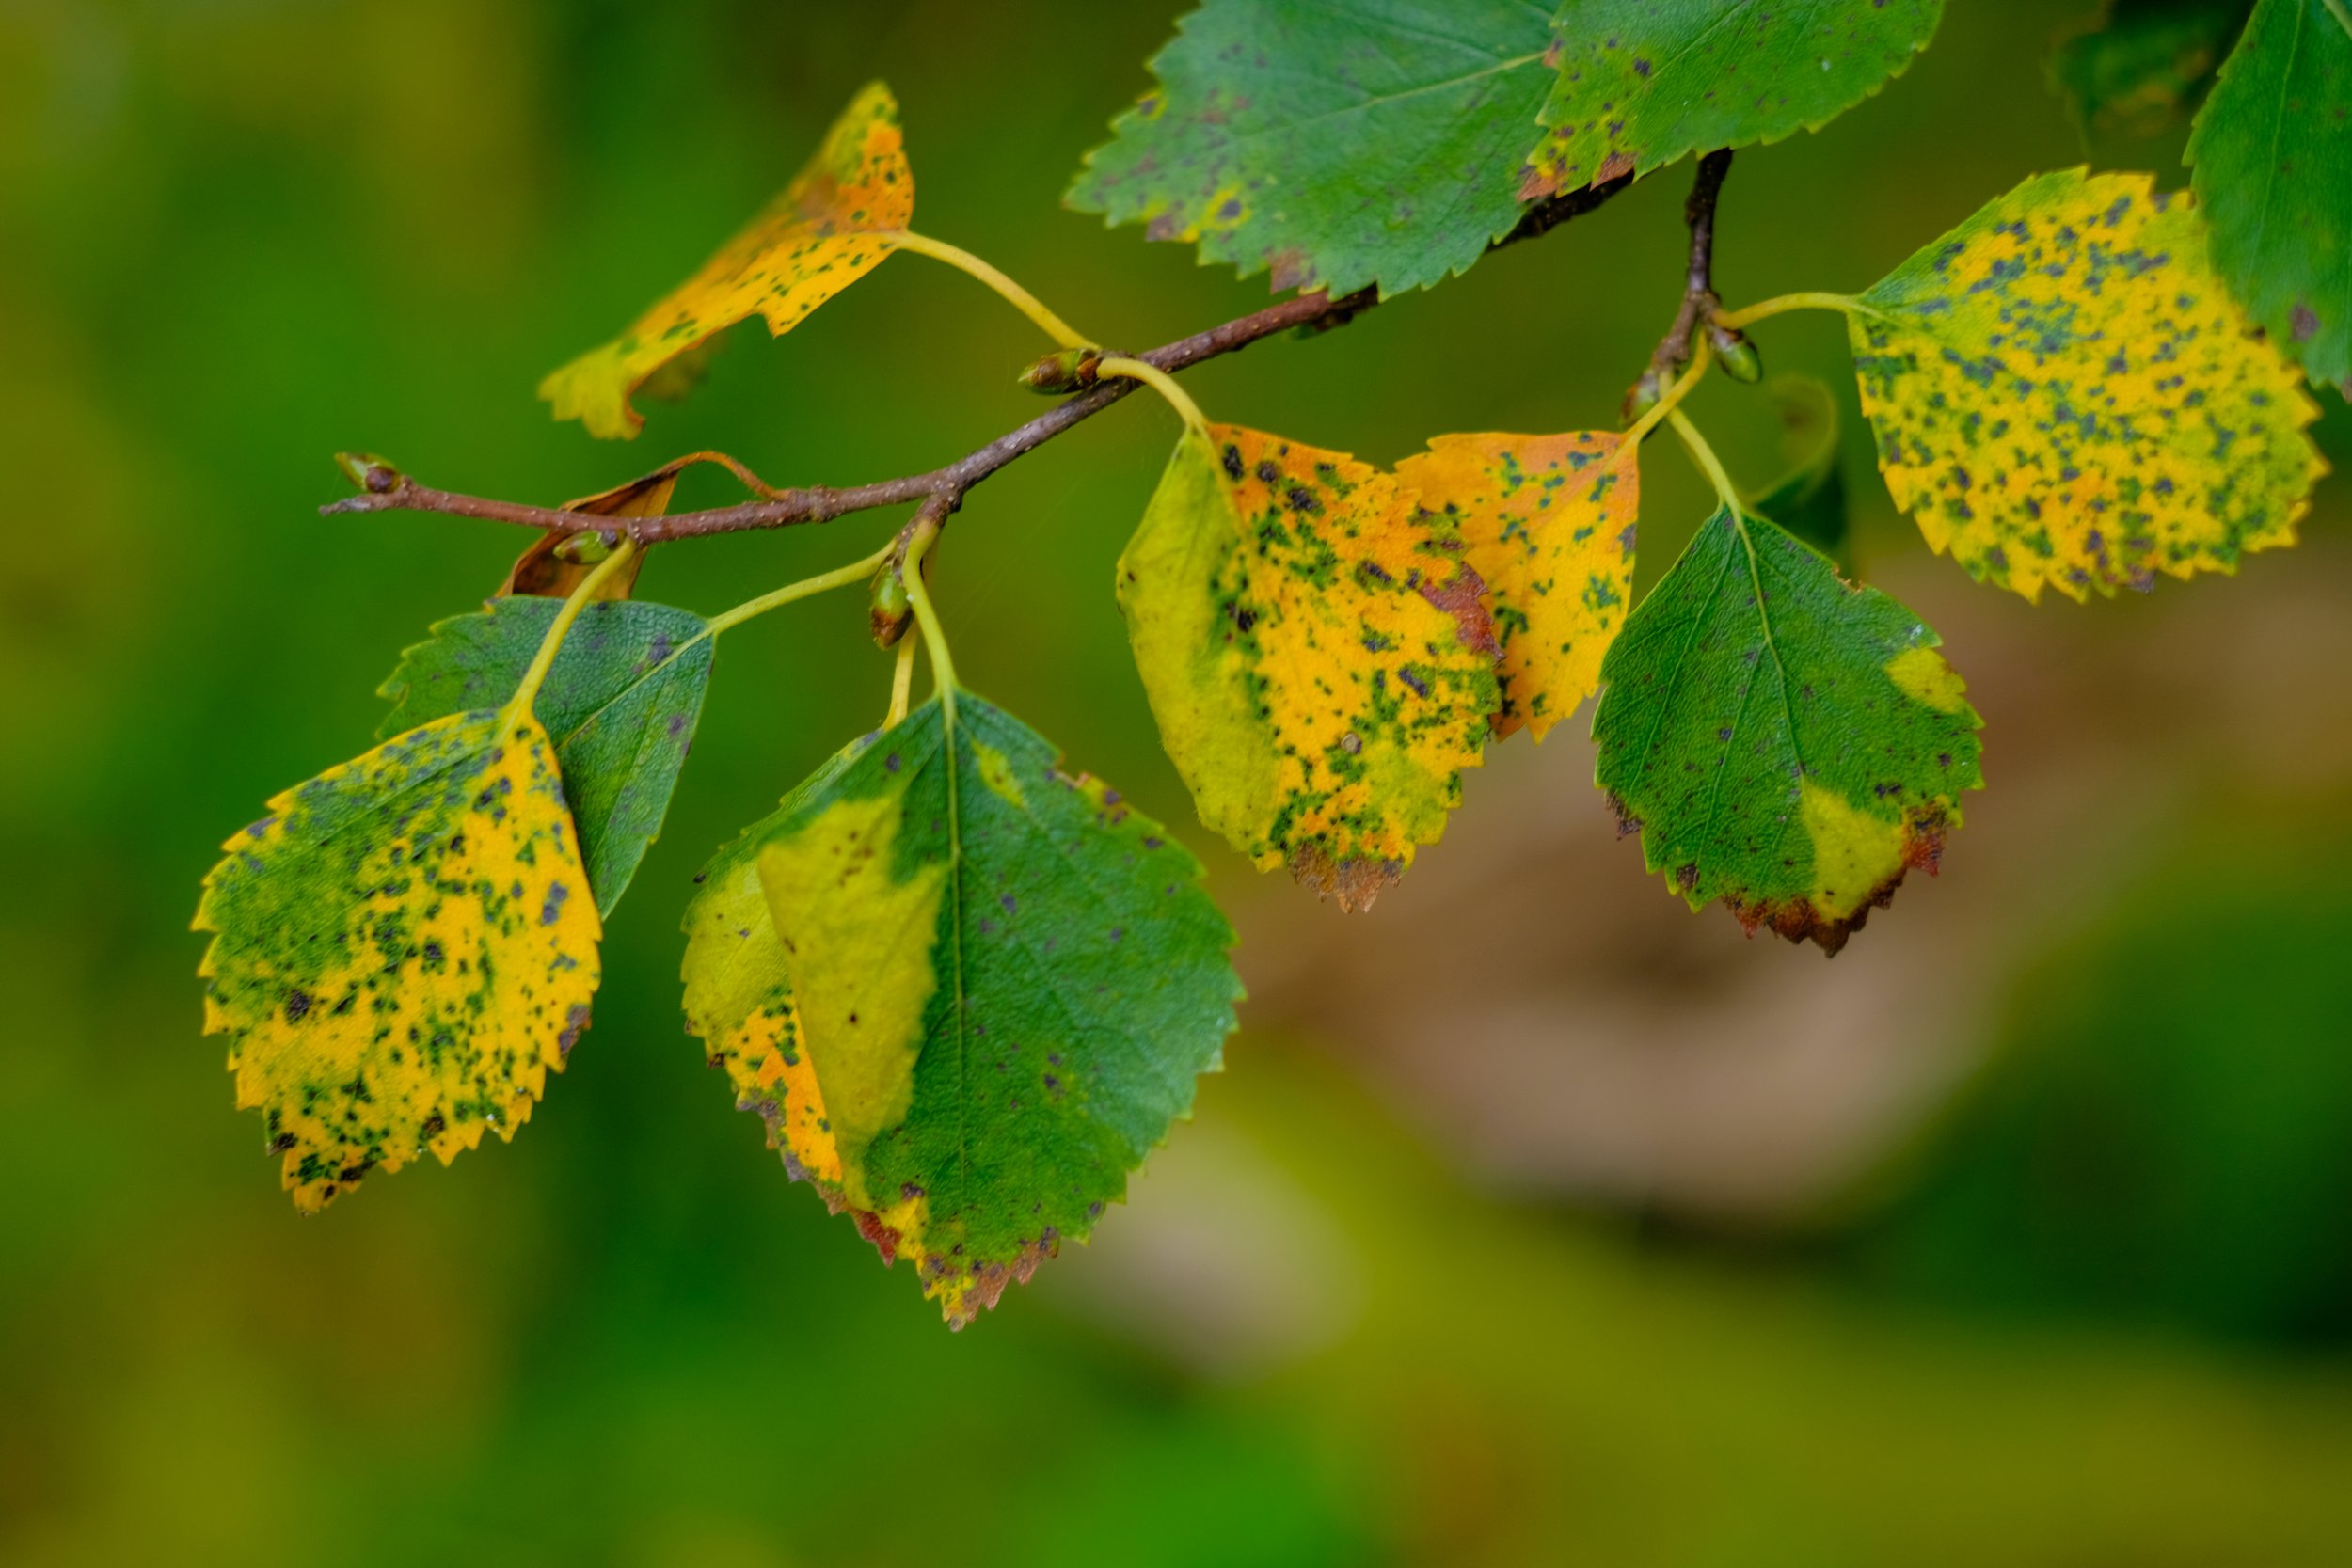 0b_Downy birch leaves changing colour in autumn. Photo credit Calum Sweeney.jpg